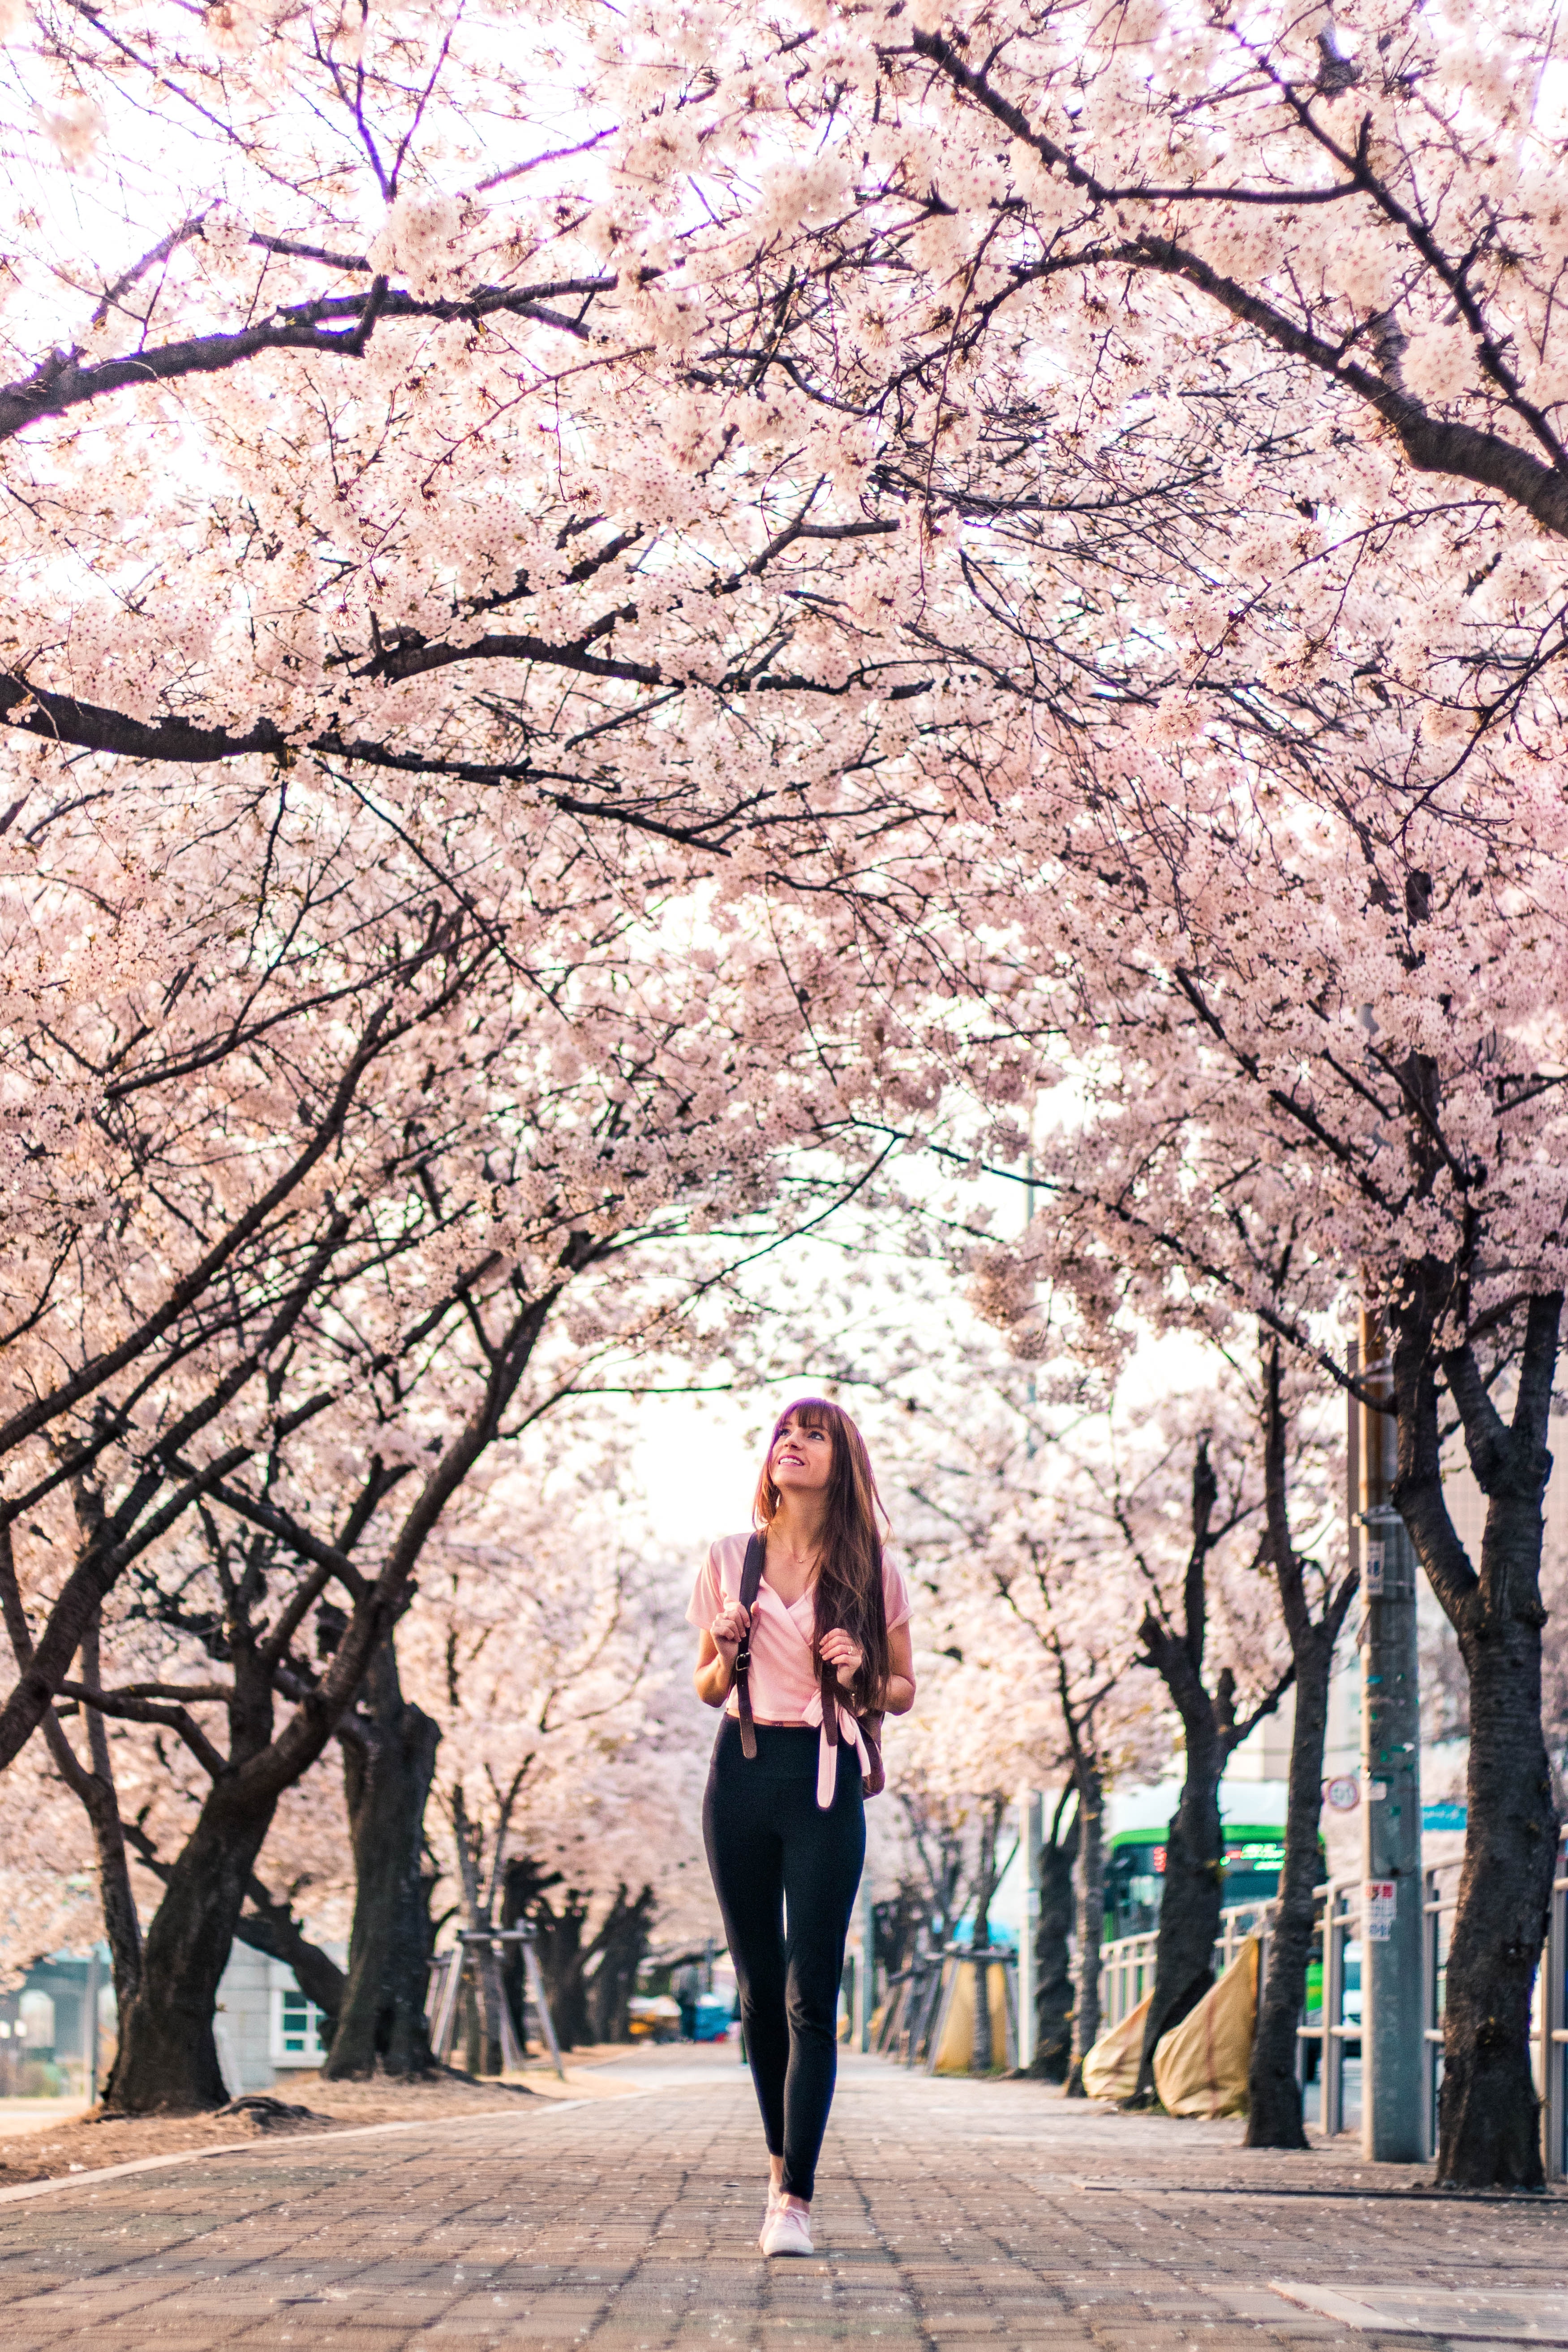 Woman in Black Jacket Standing Under White Cherry Blossom Tree · Free